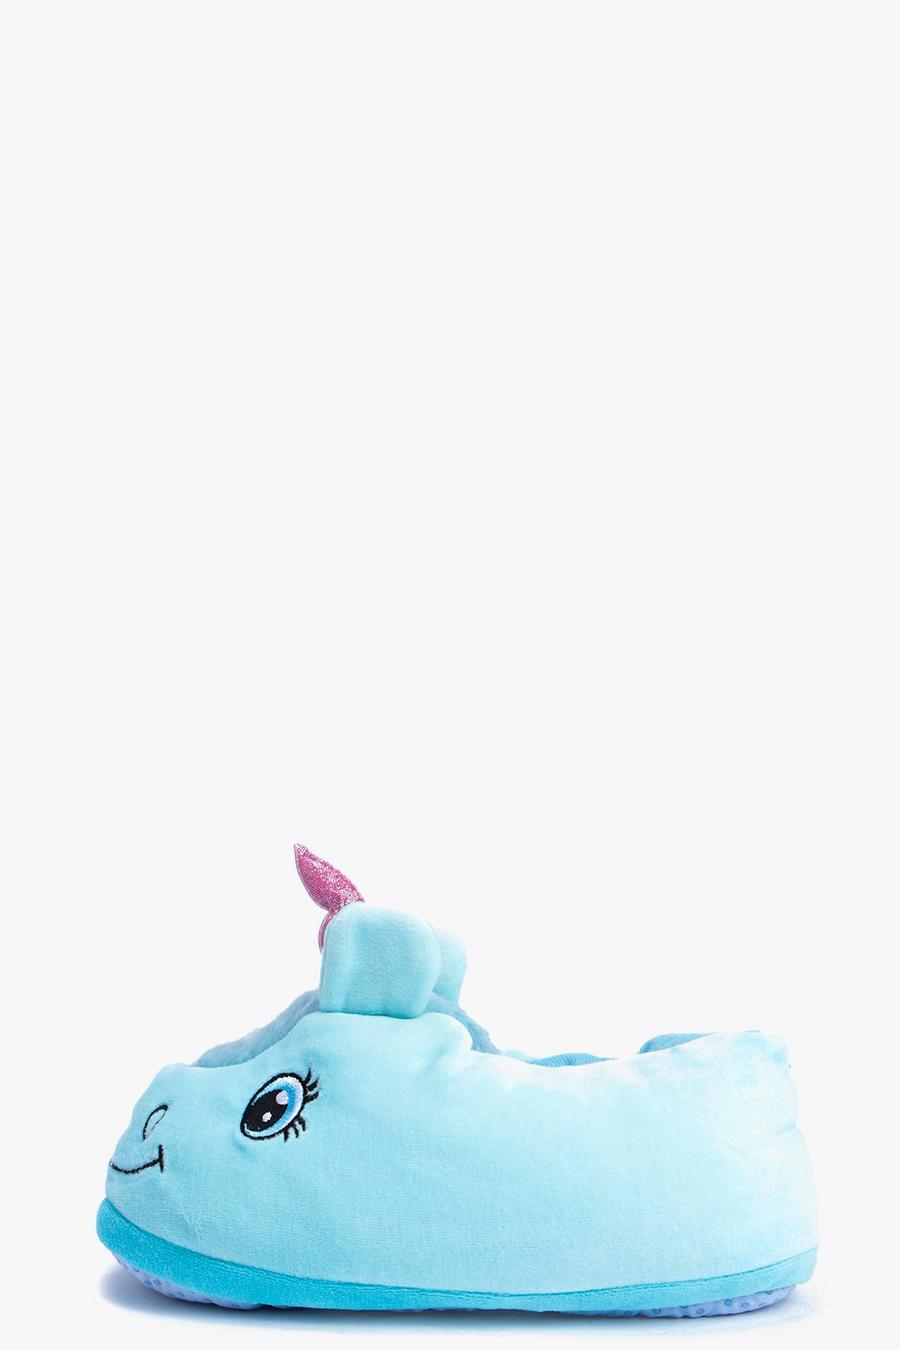 Till chaussons fantaisie licorne, Blue image number 1